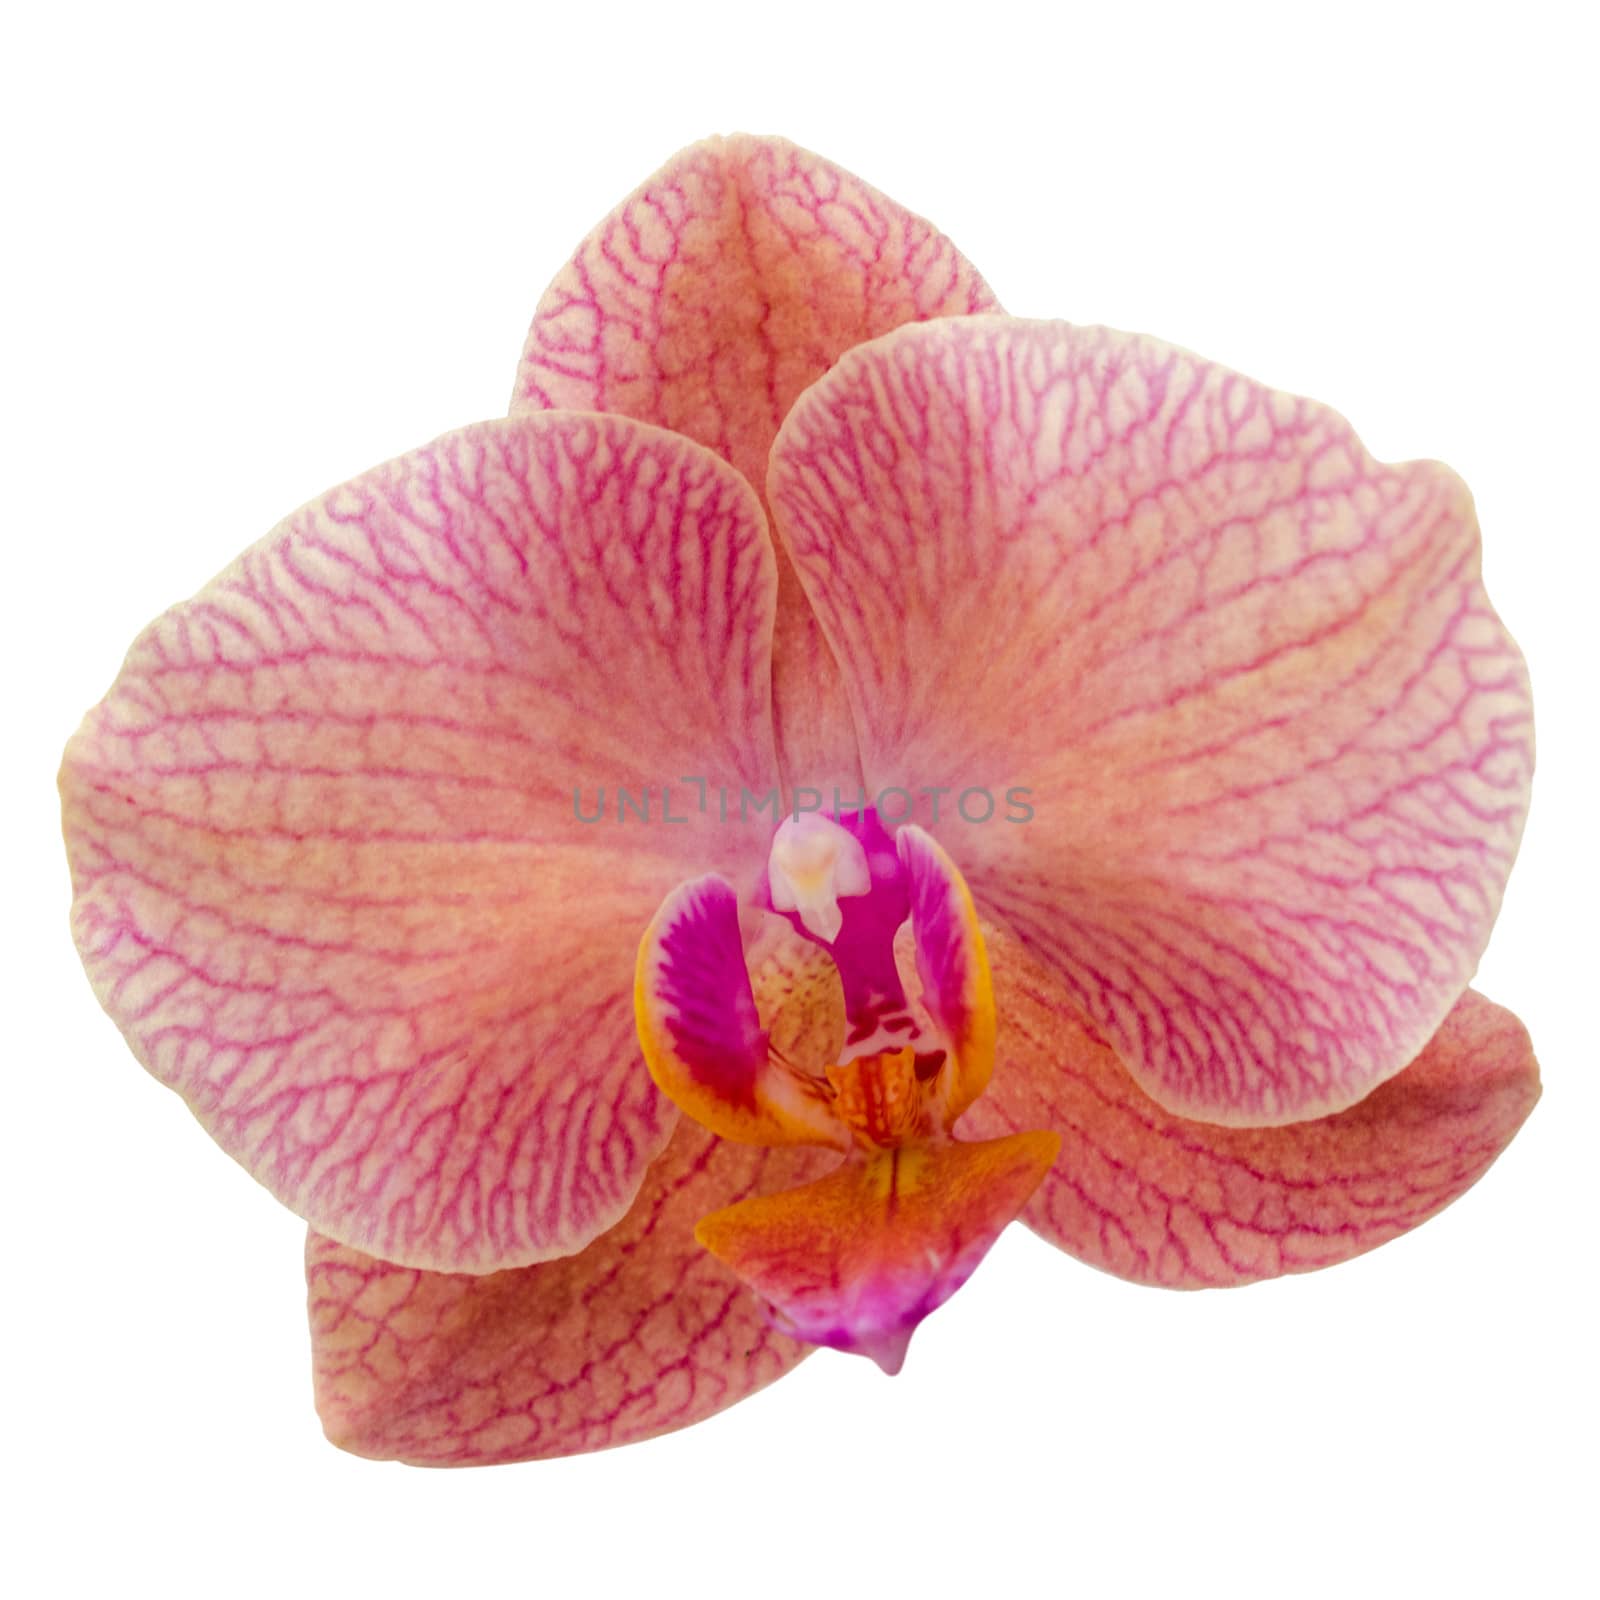 Single violet orchid flower isolate on white